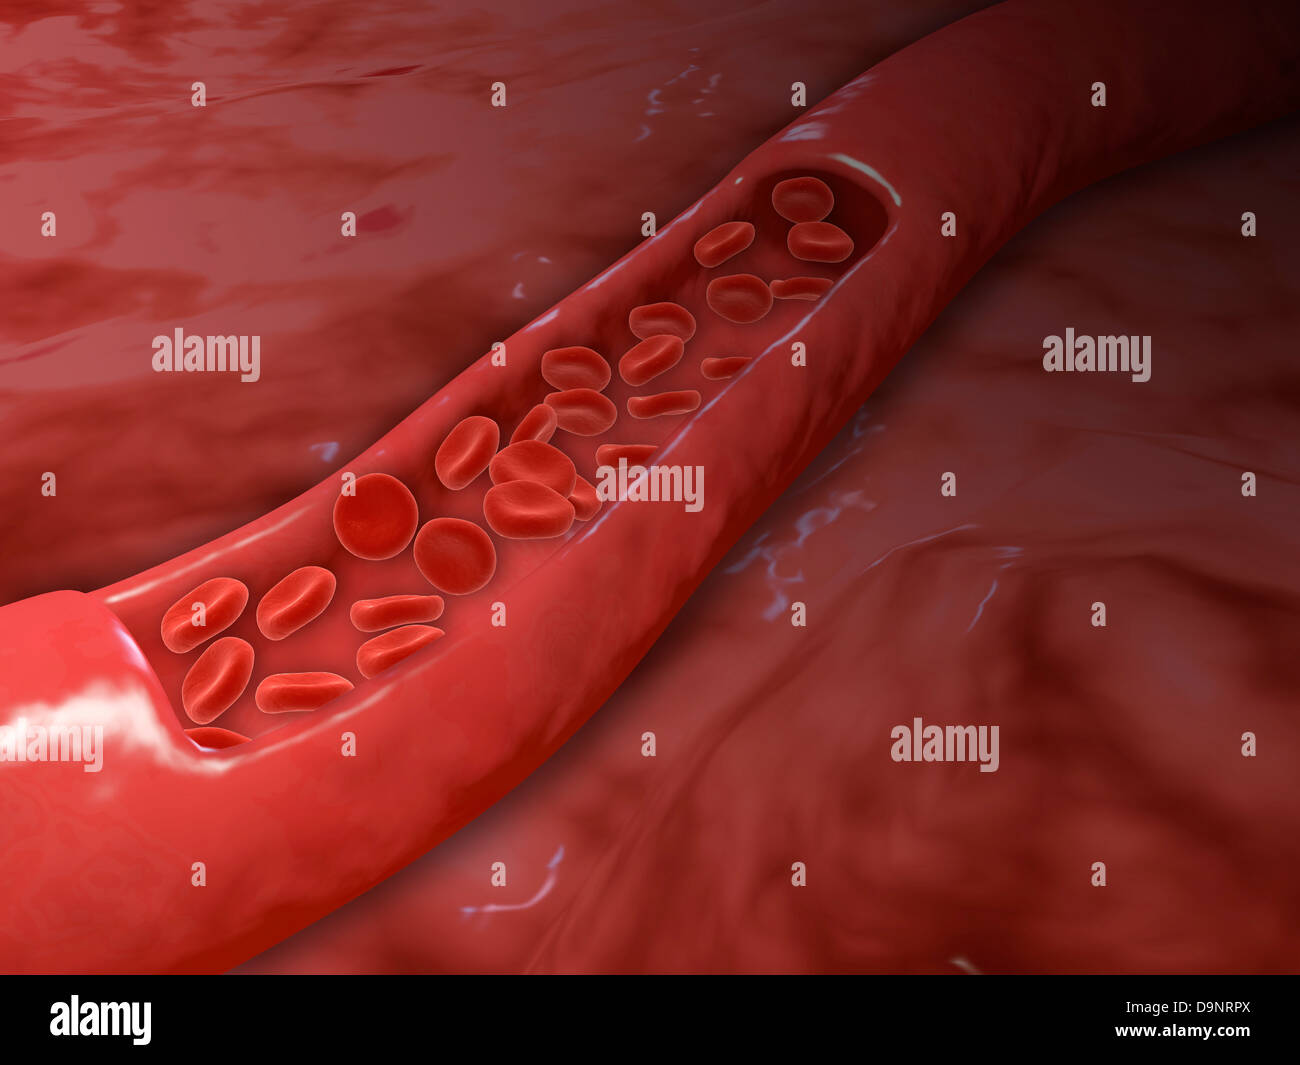 Artery cross section with red blood cell flow. Stock Photo